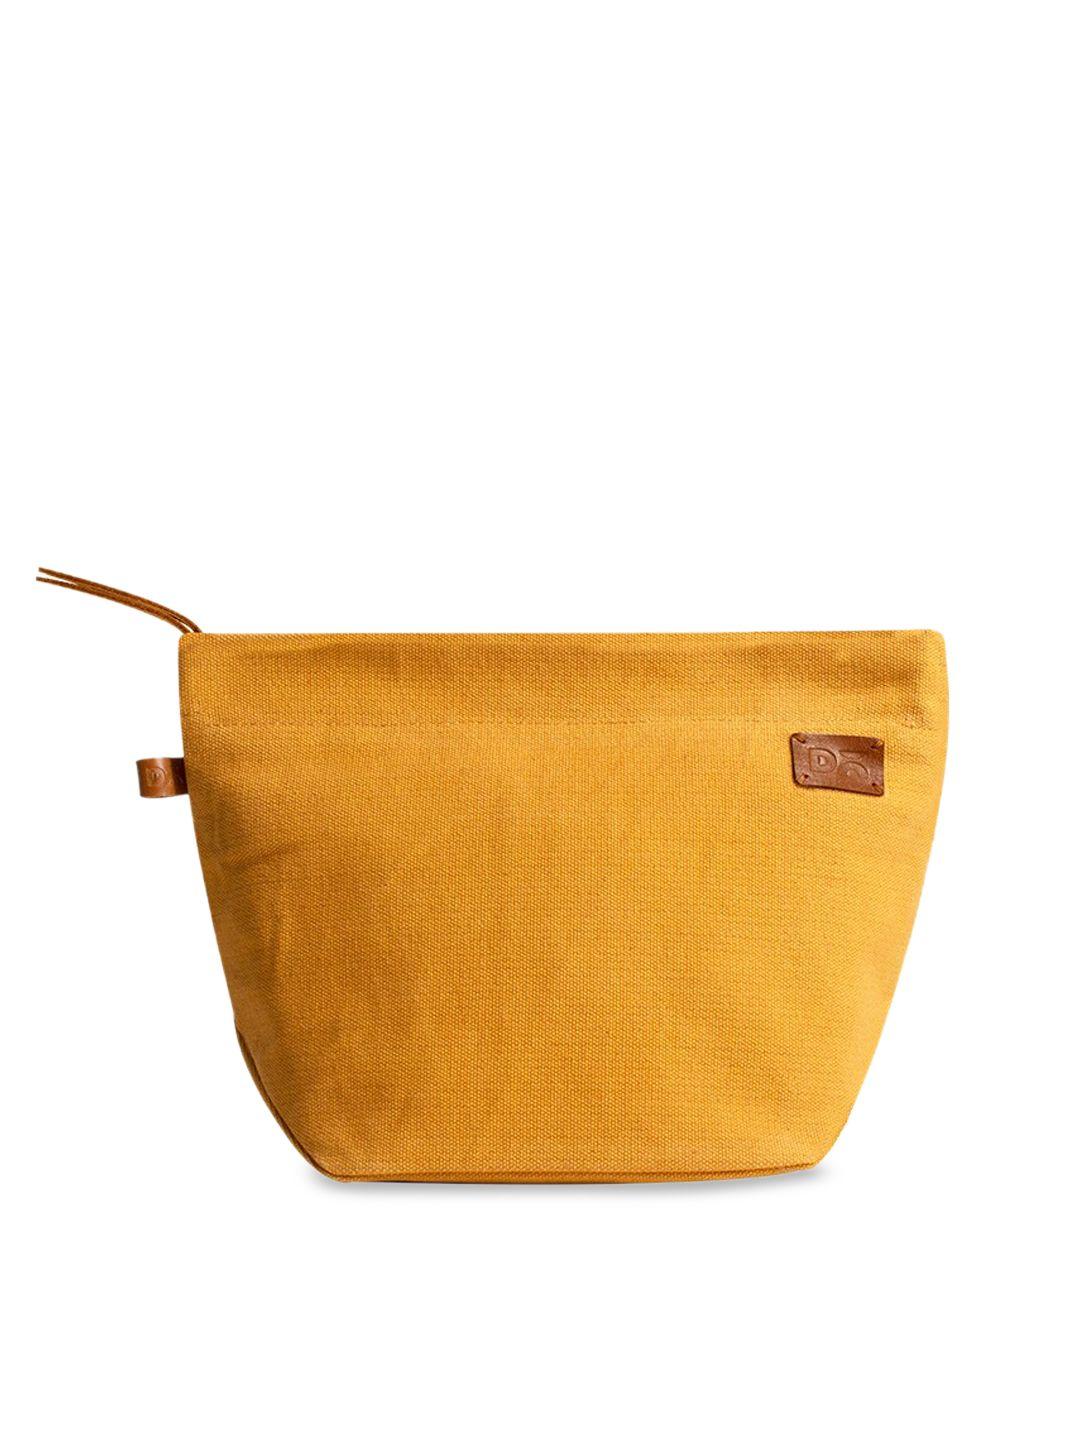 dailyobjects unisex mustard yellow solid pouch